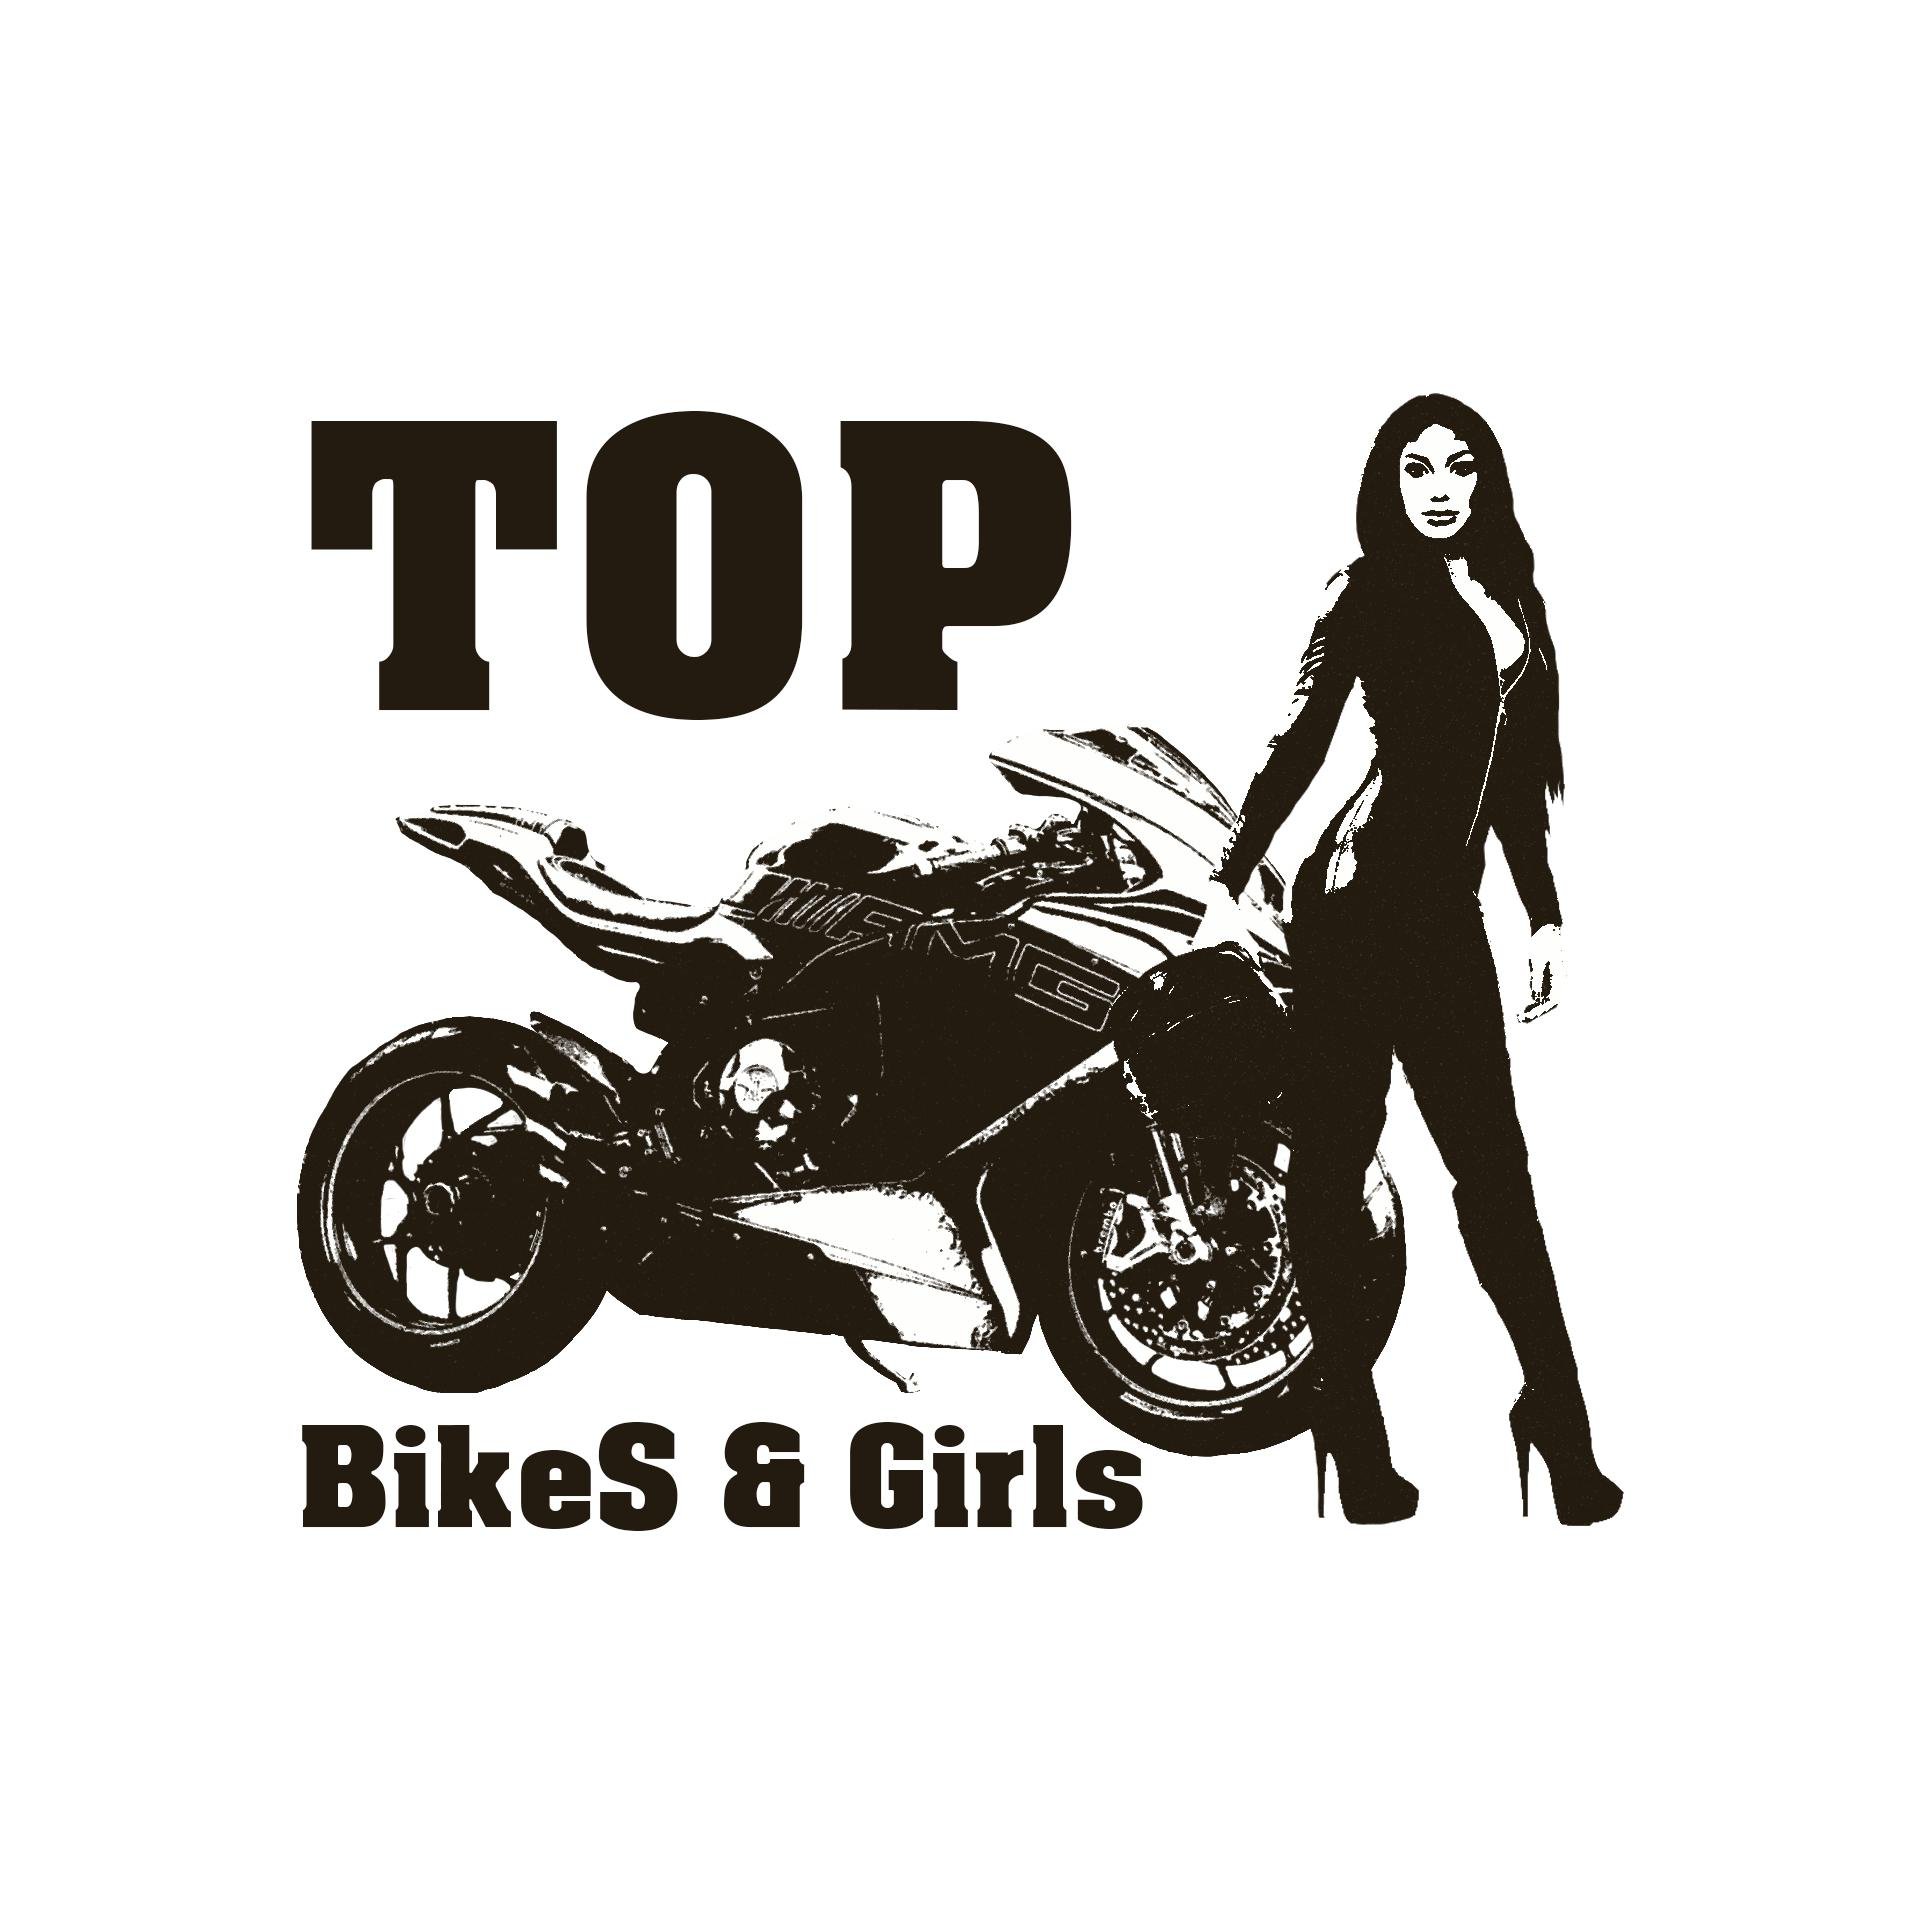 Fast ride & pretty girls.👍 For thouse who can appreciate TRUE ROAD STYLE🏍